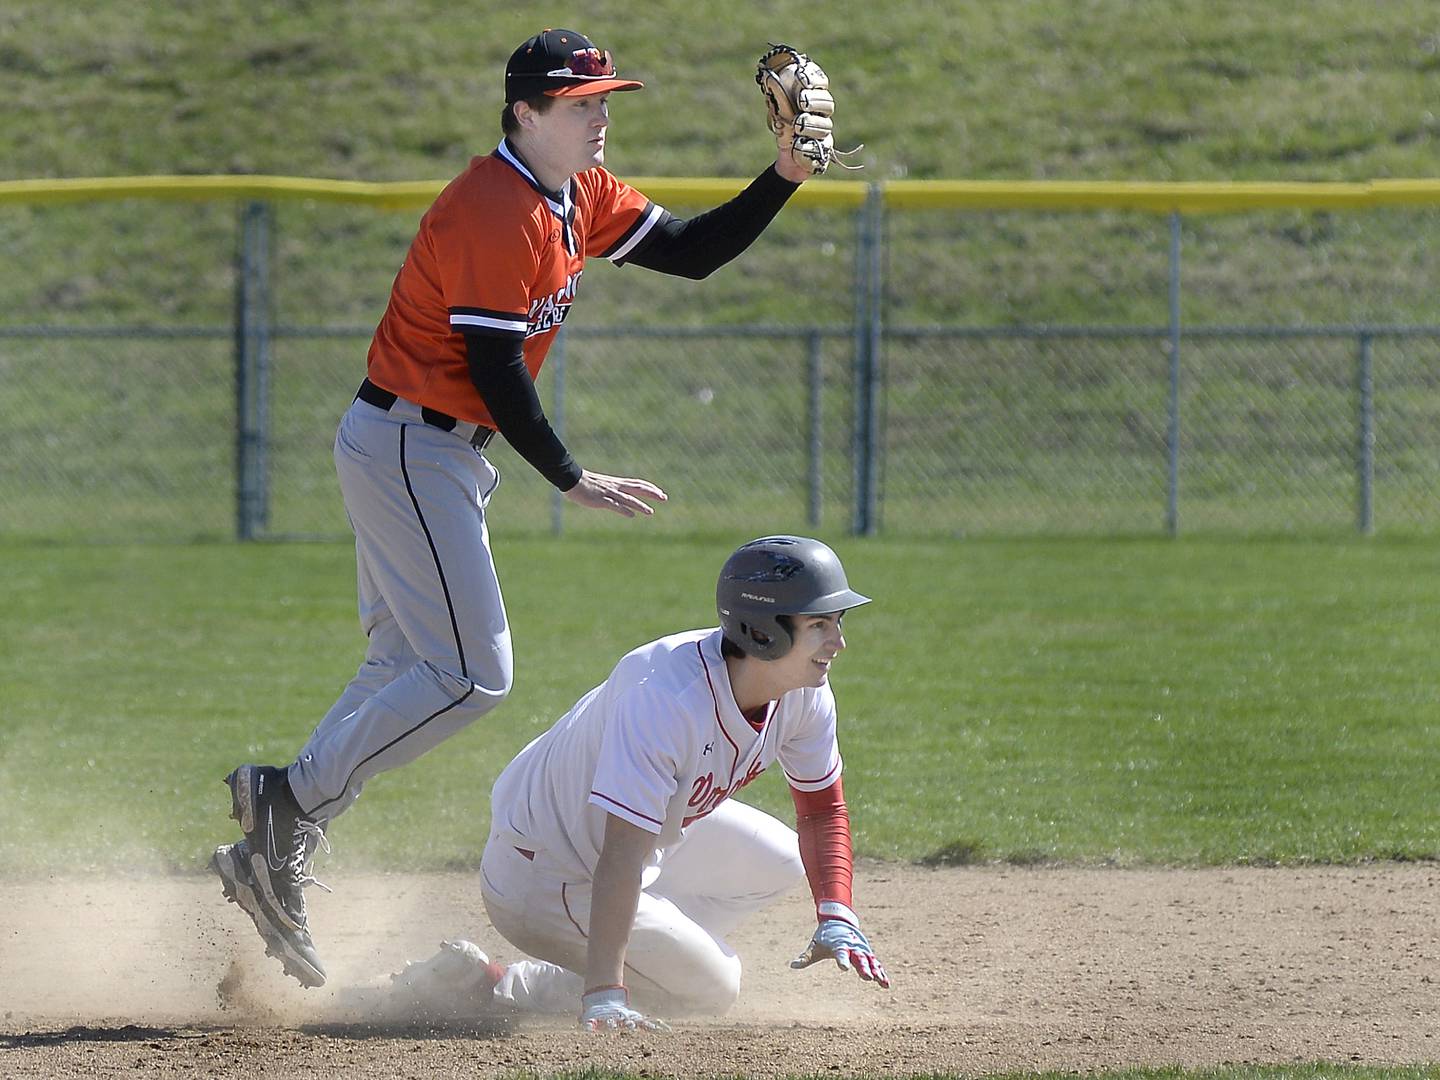 Ottawa’s Payton Knoll  looks for the call after being tagged out by Washington’s Brock Maxwell at 2nd base in the 3rd inning on Saturday, April 8, 2023 at Ottawa High School.